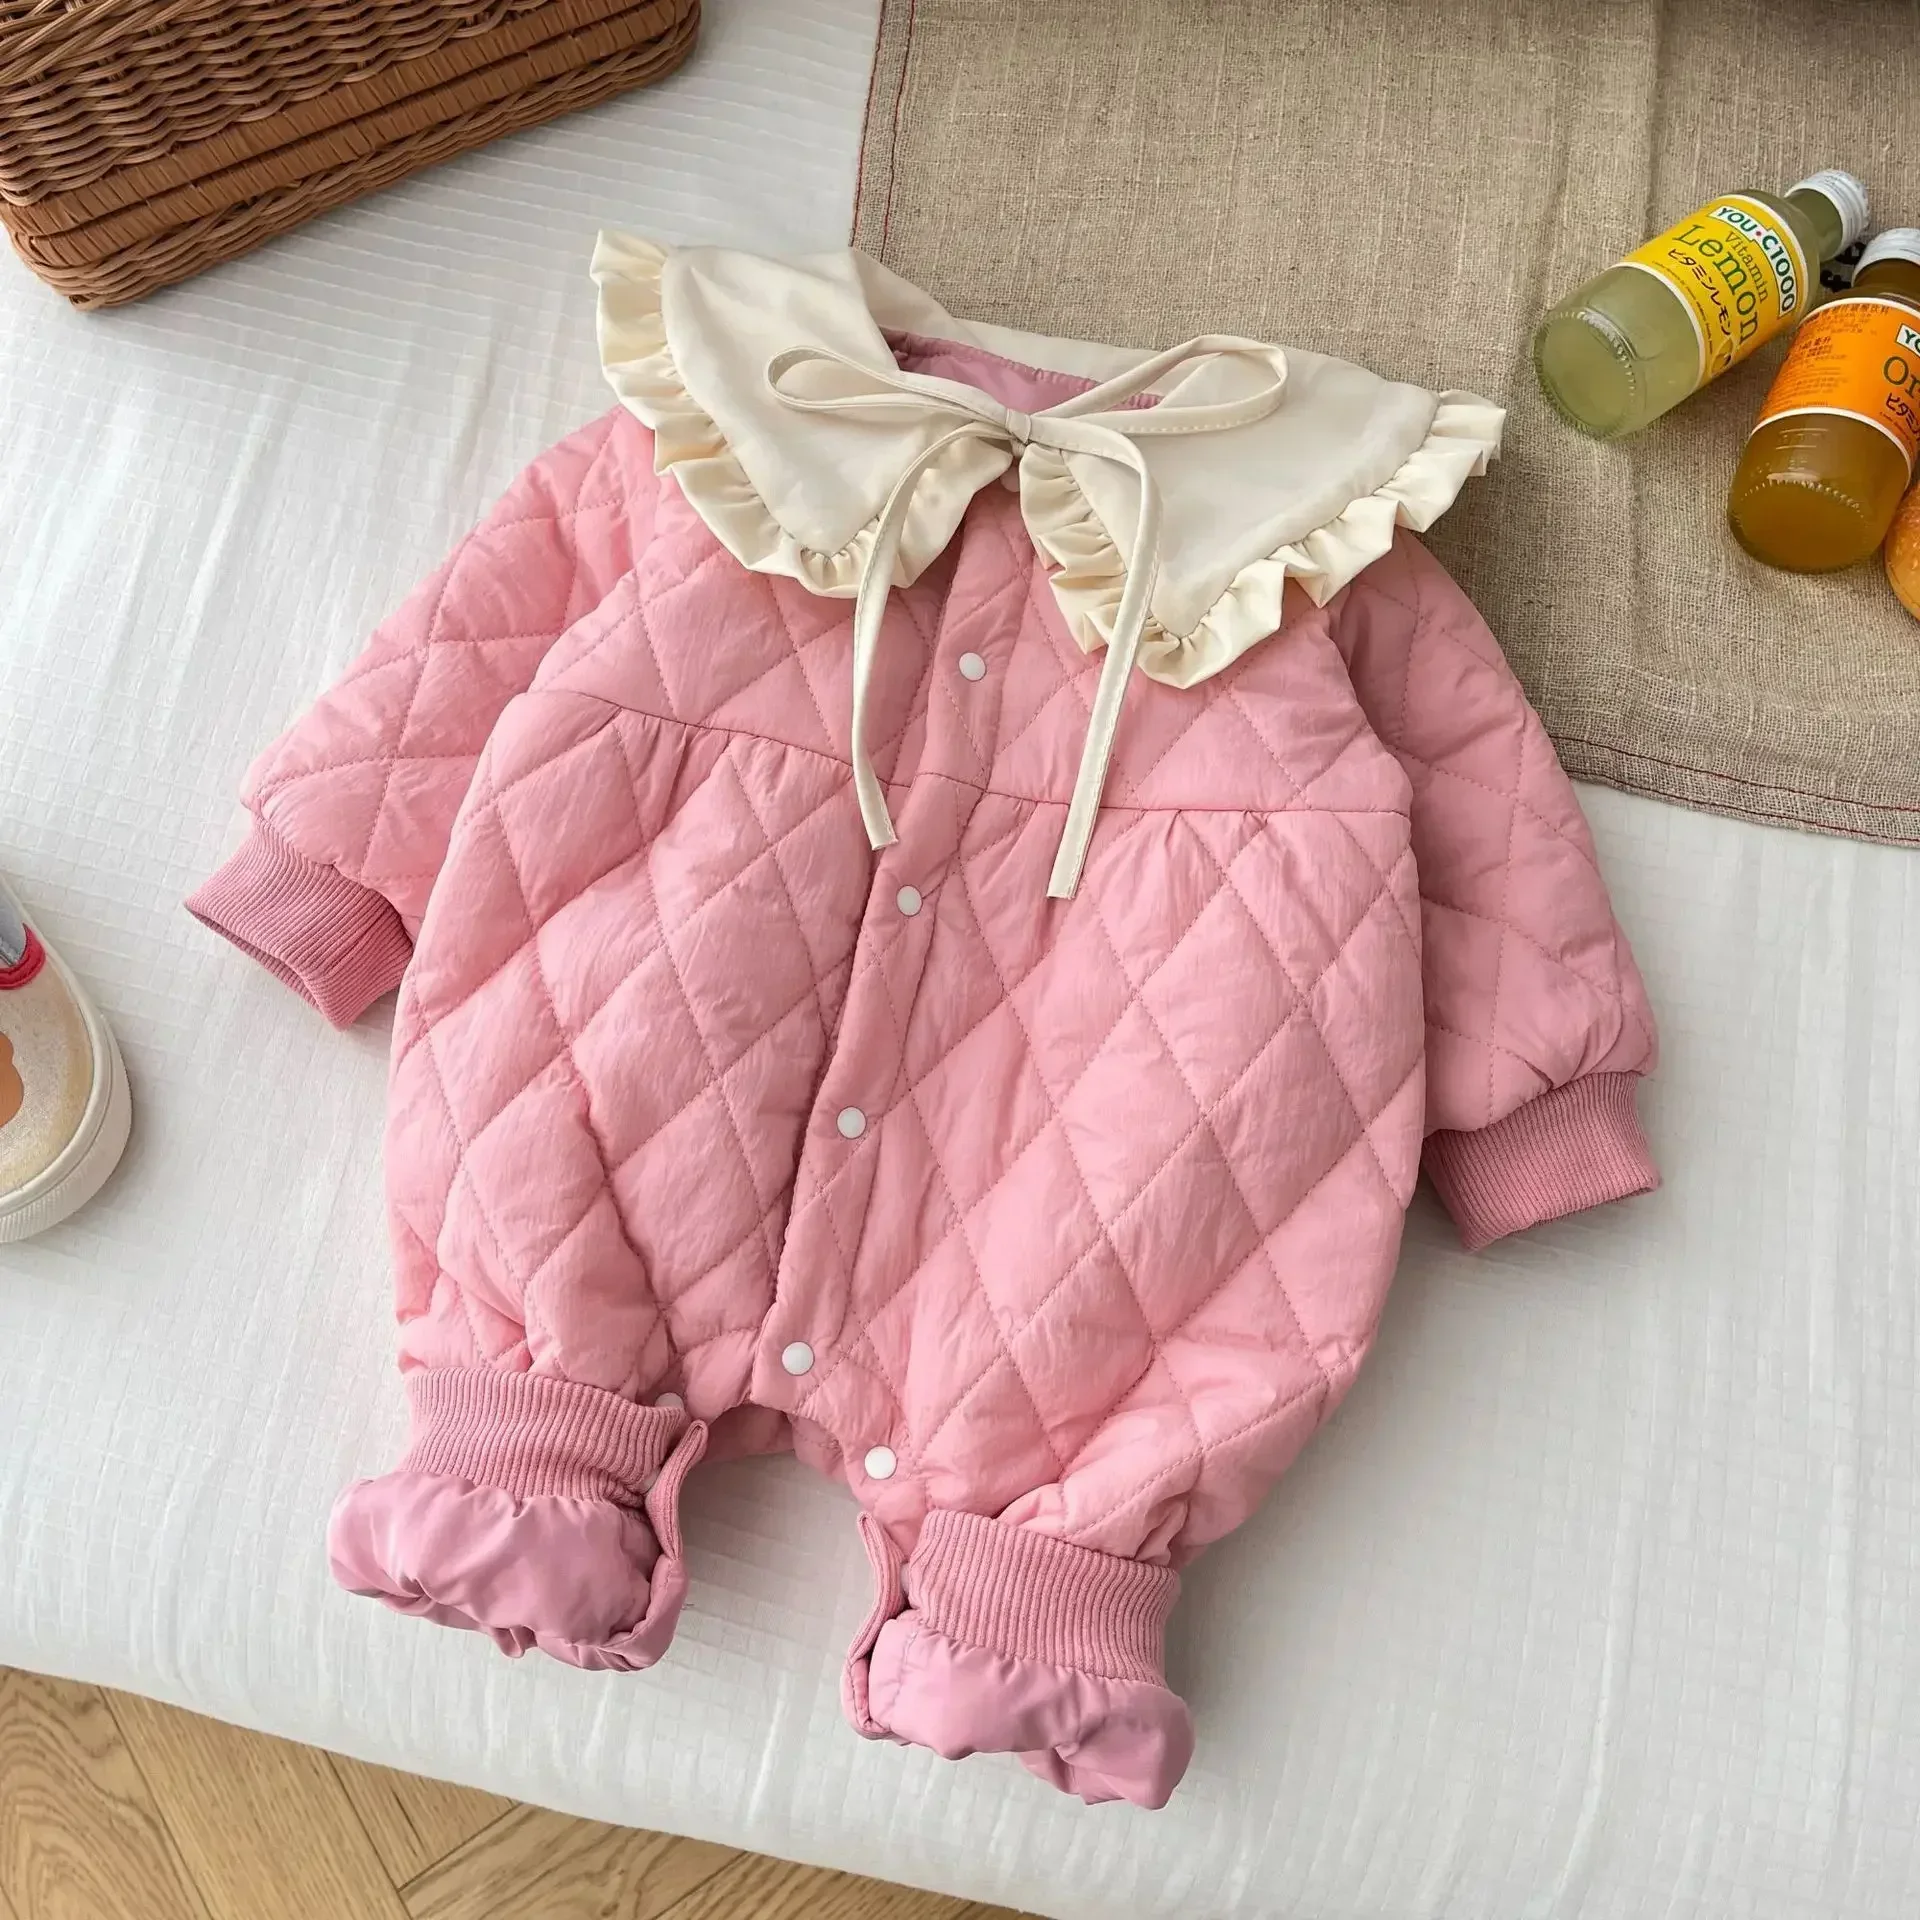 

Quilted Jumpsuit Gift Bag for Baby - Winter Thickened Quilting Thread Romper Kids Infant Girls 0-2 Years Old, Newborn Clothes